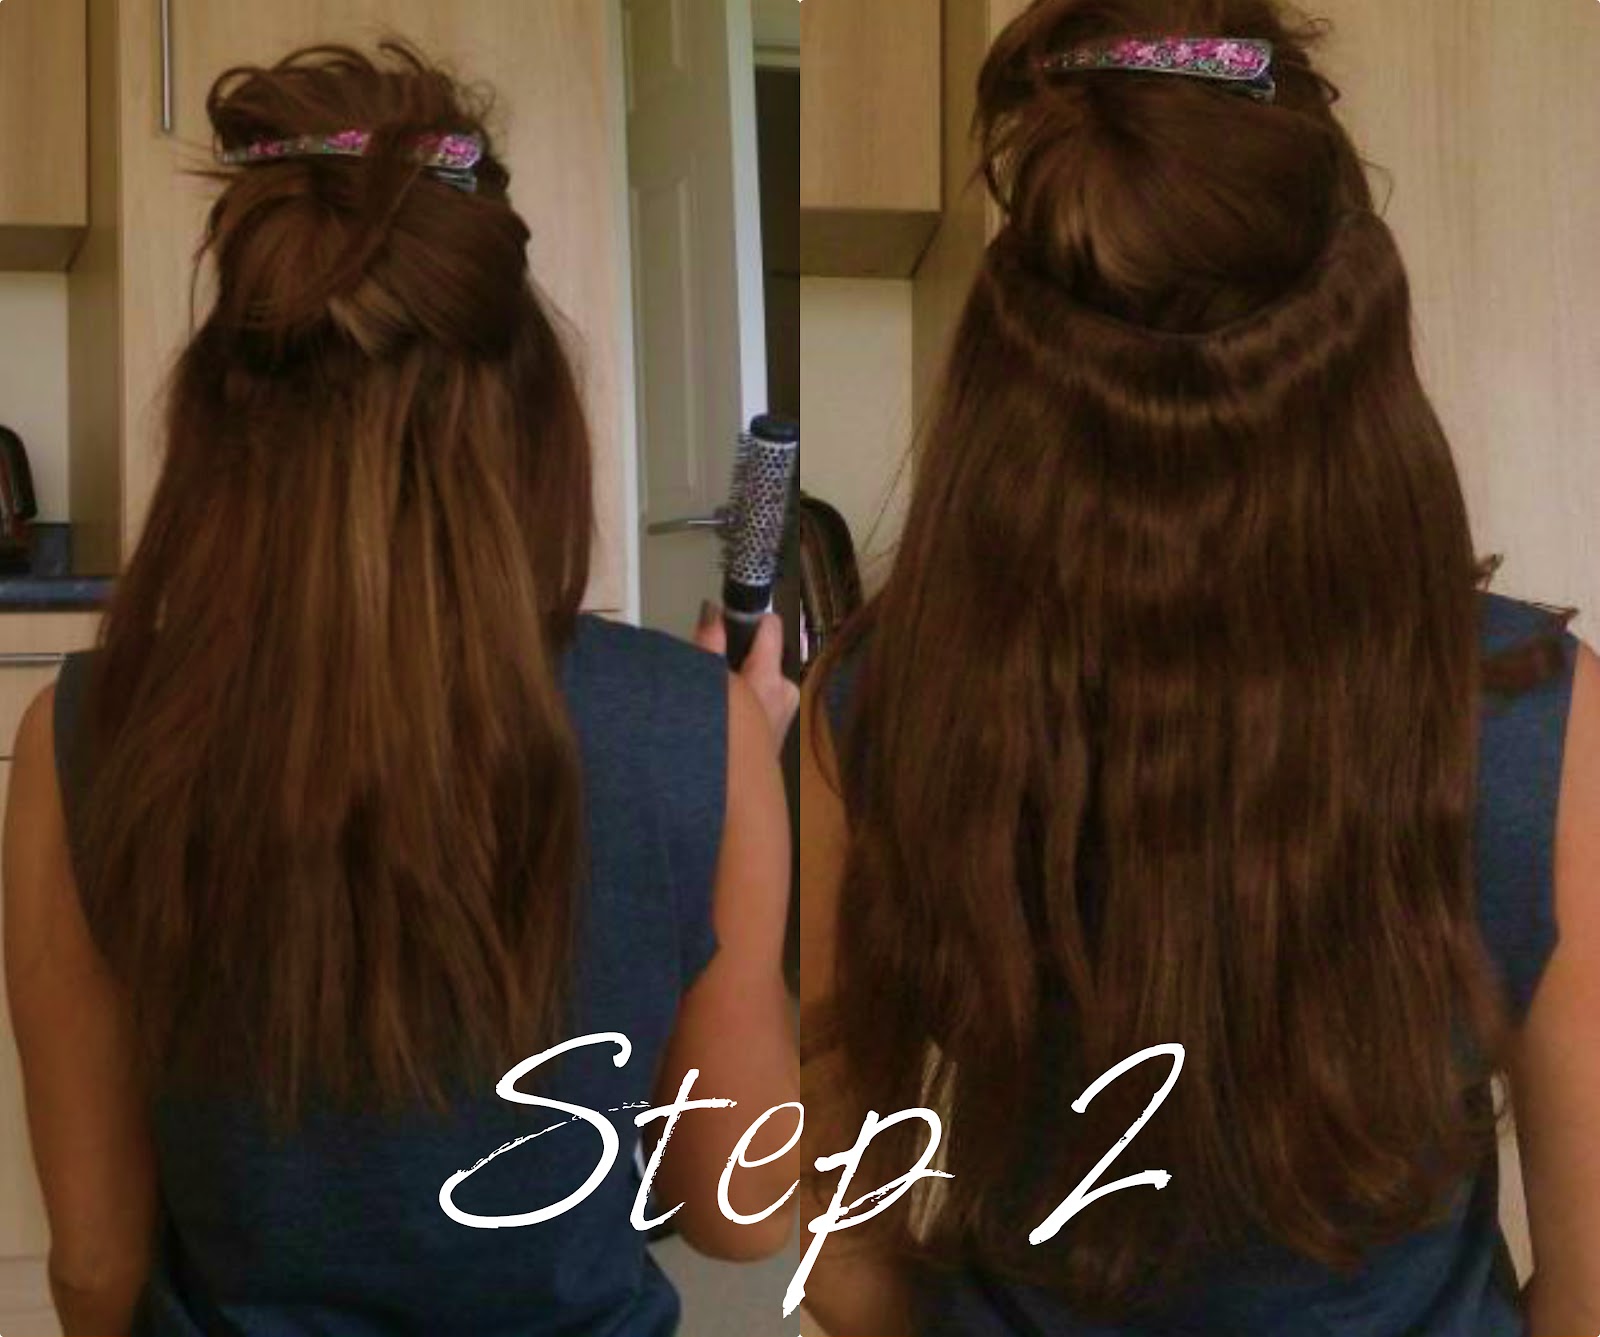 Curly Wavy Hair Tutorial featuring Halo Hair Extensions ...